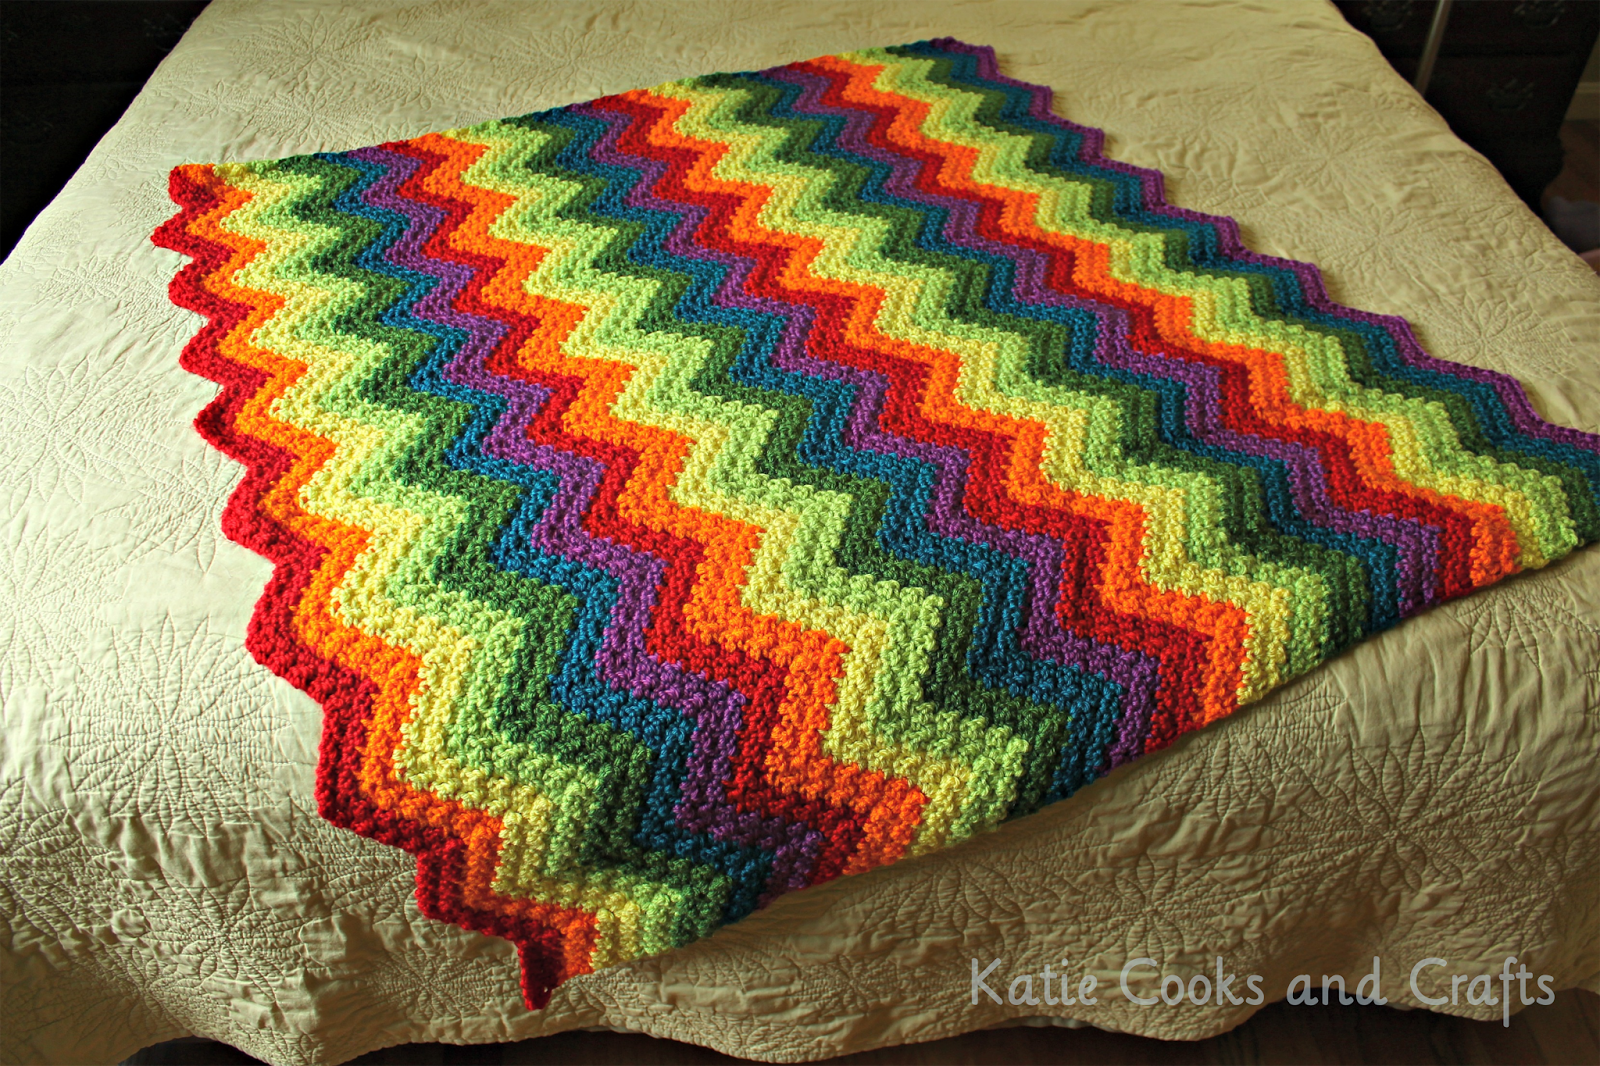 Download Katie Cooks and Crafts: Rumpled Ripple Rainbow Crochet Baby Afghan Pattern